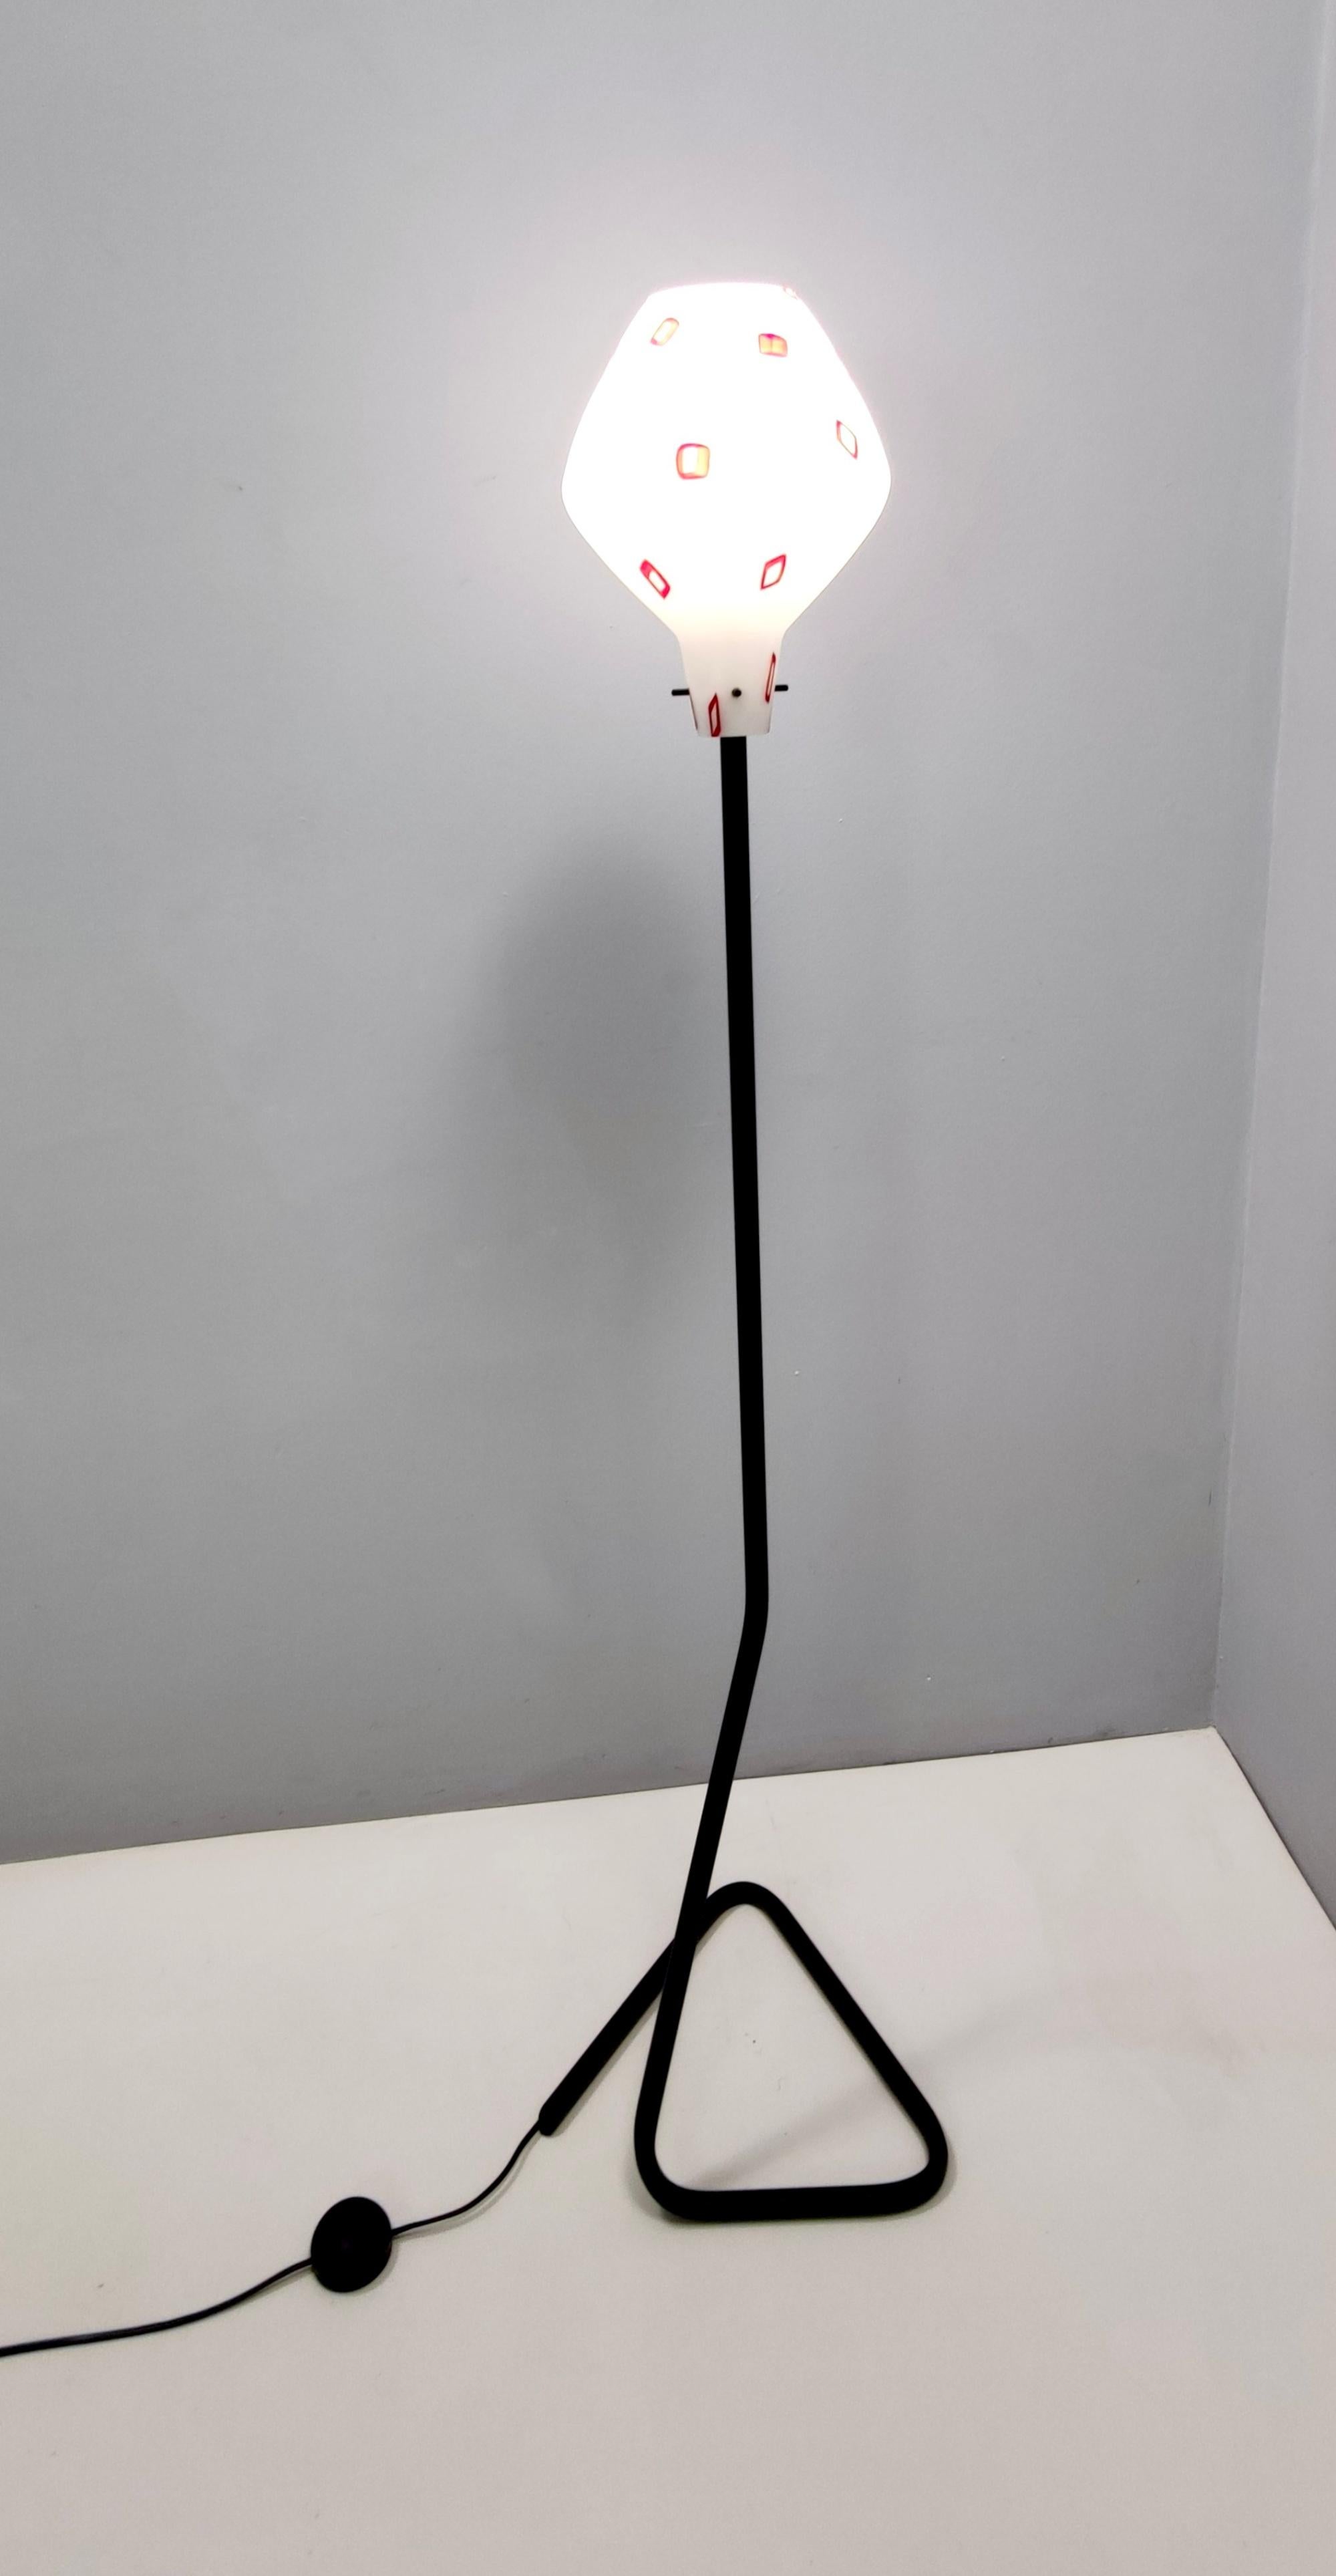 Made in Italy.
This beautiful floor lamp features a 50s encased glass shade with red geometrical motifs.
We designed the varnished metal stem.
It's a one-of-a-kind.
This floor lamp has a vintage shade, therefore it might show slight traces of use,